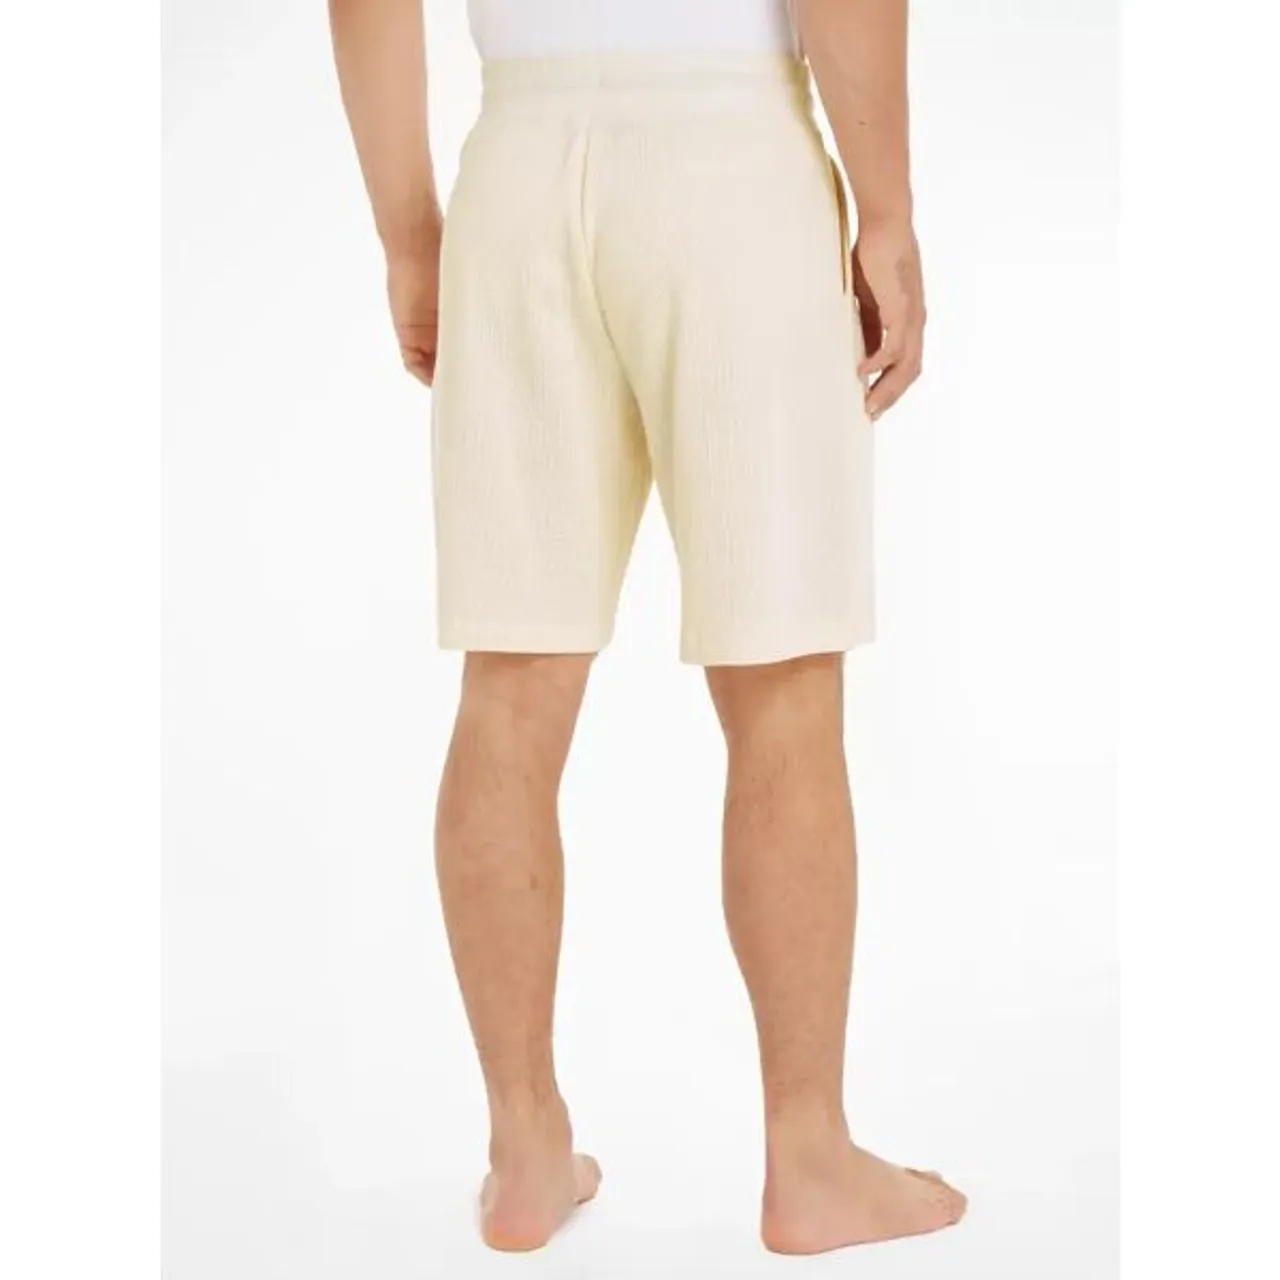 Tommy Hilfiger Cotton Lounge Shorts, Calico - Calico - Male